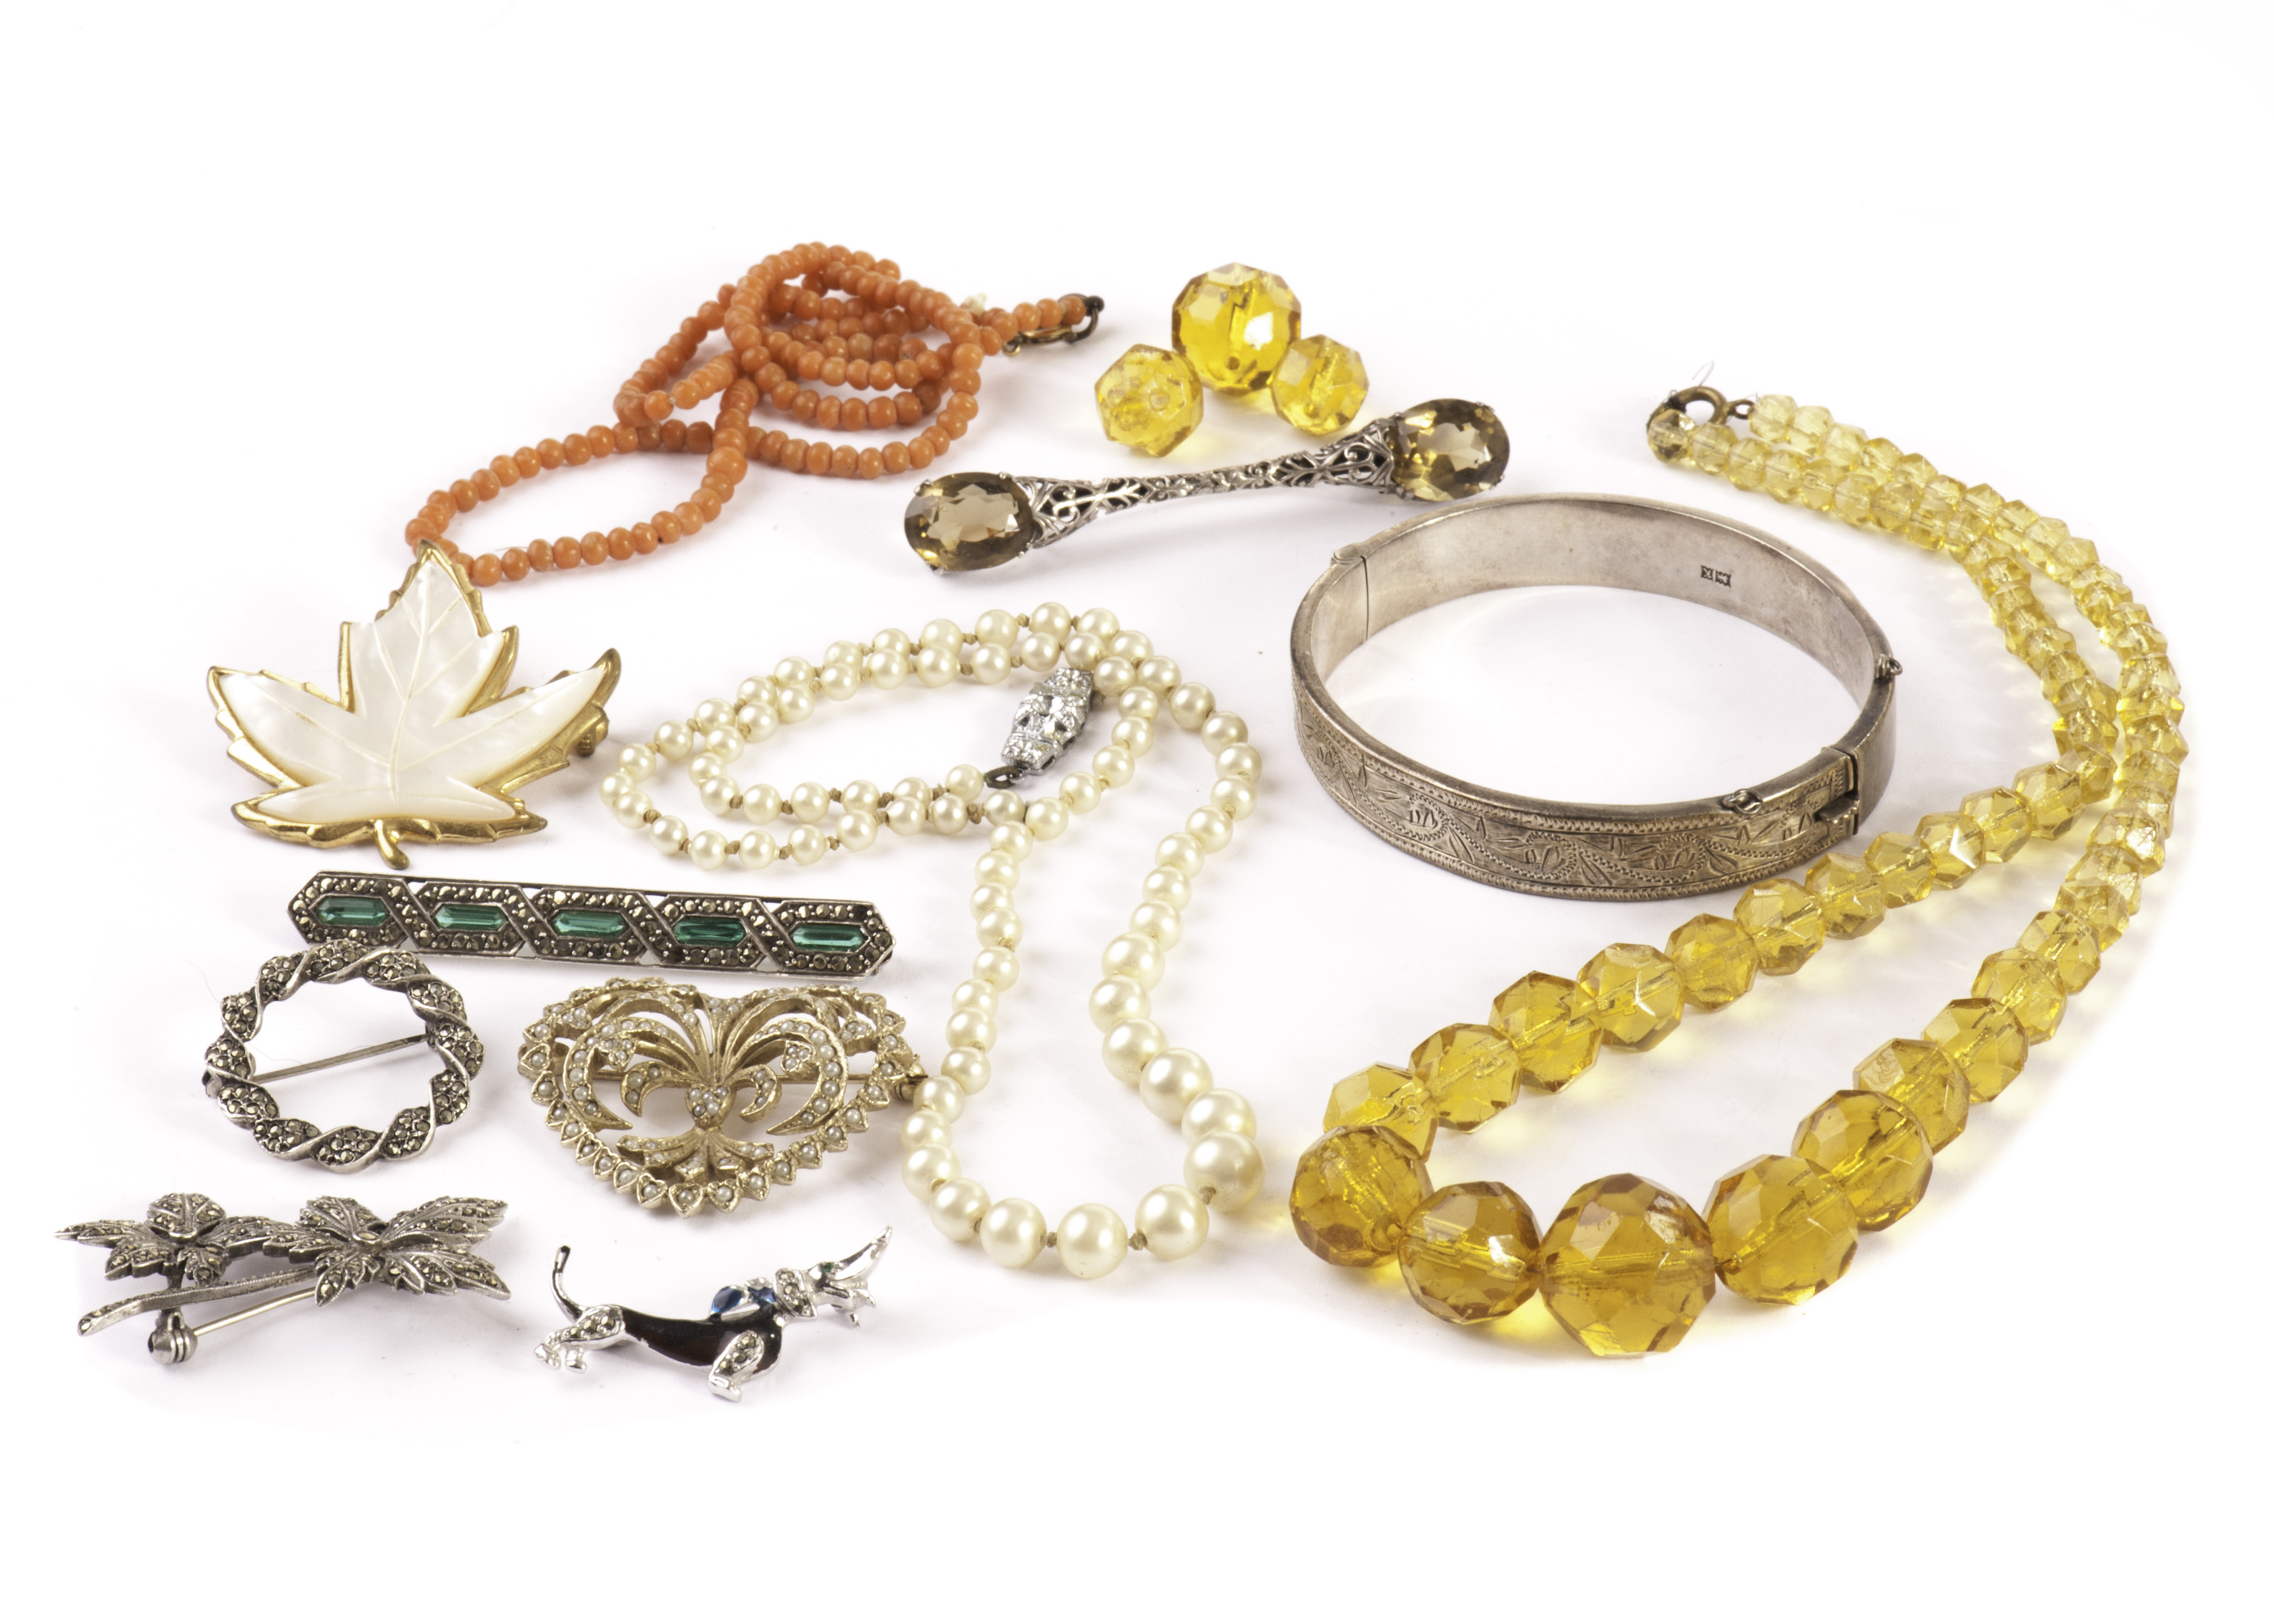 A small group of silver and other costume jewels, including a Scottish brooch, a small coral bead